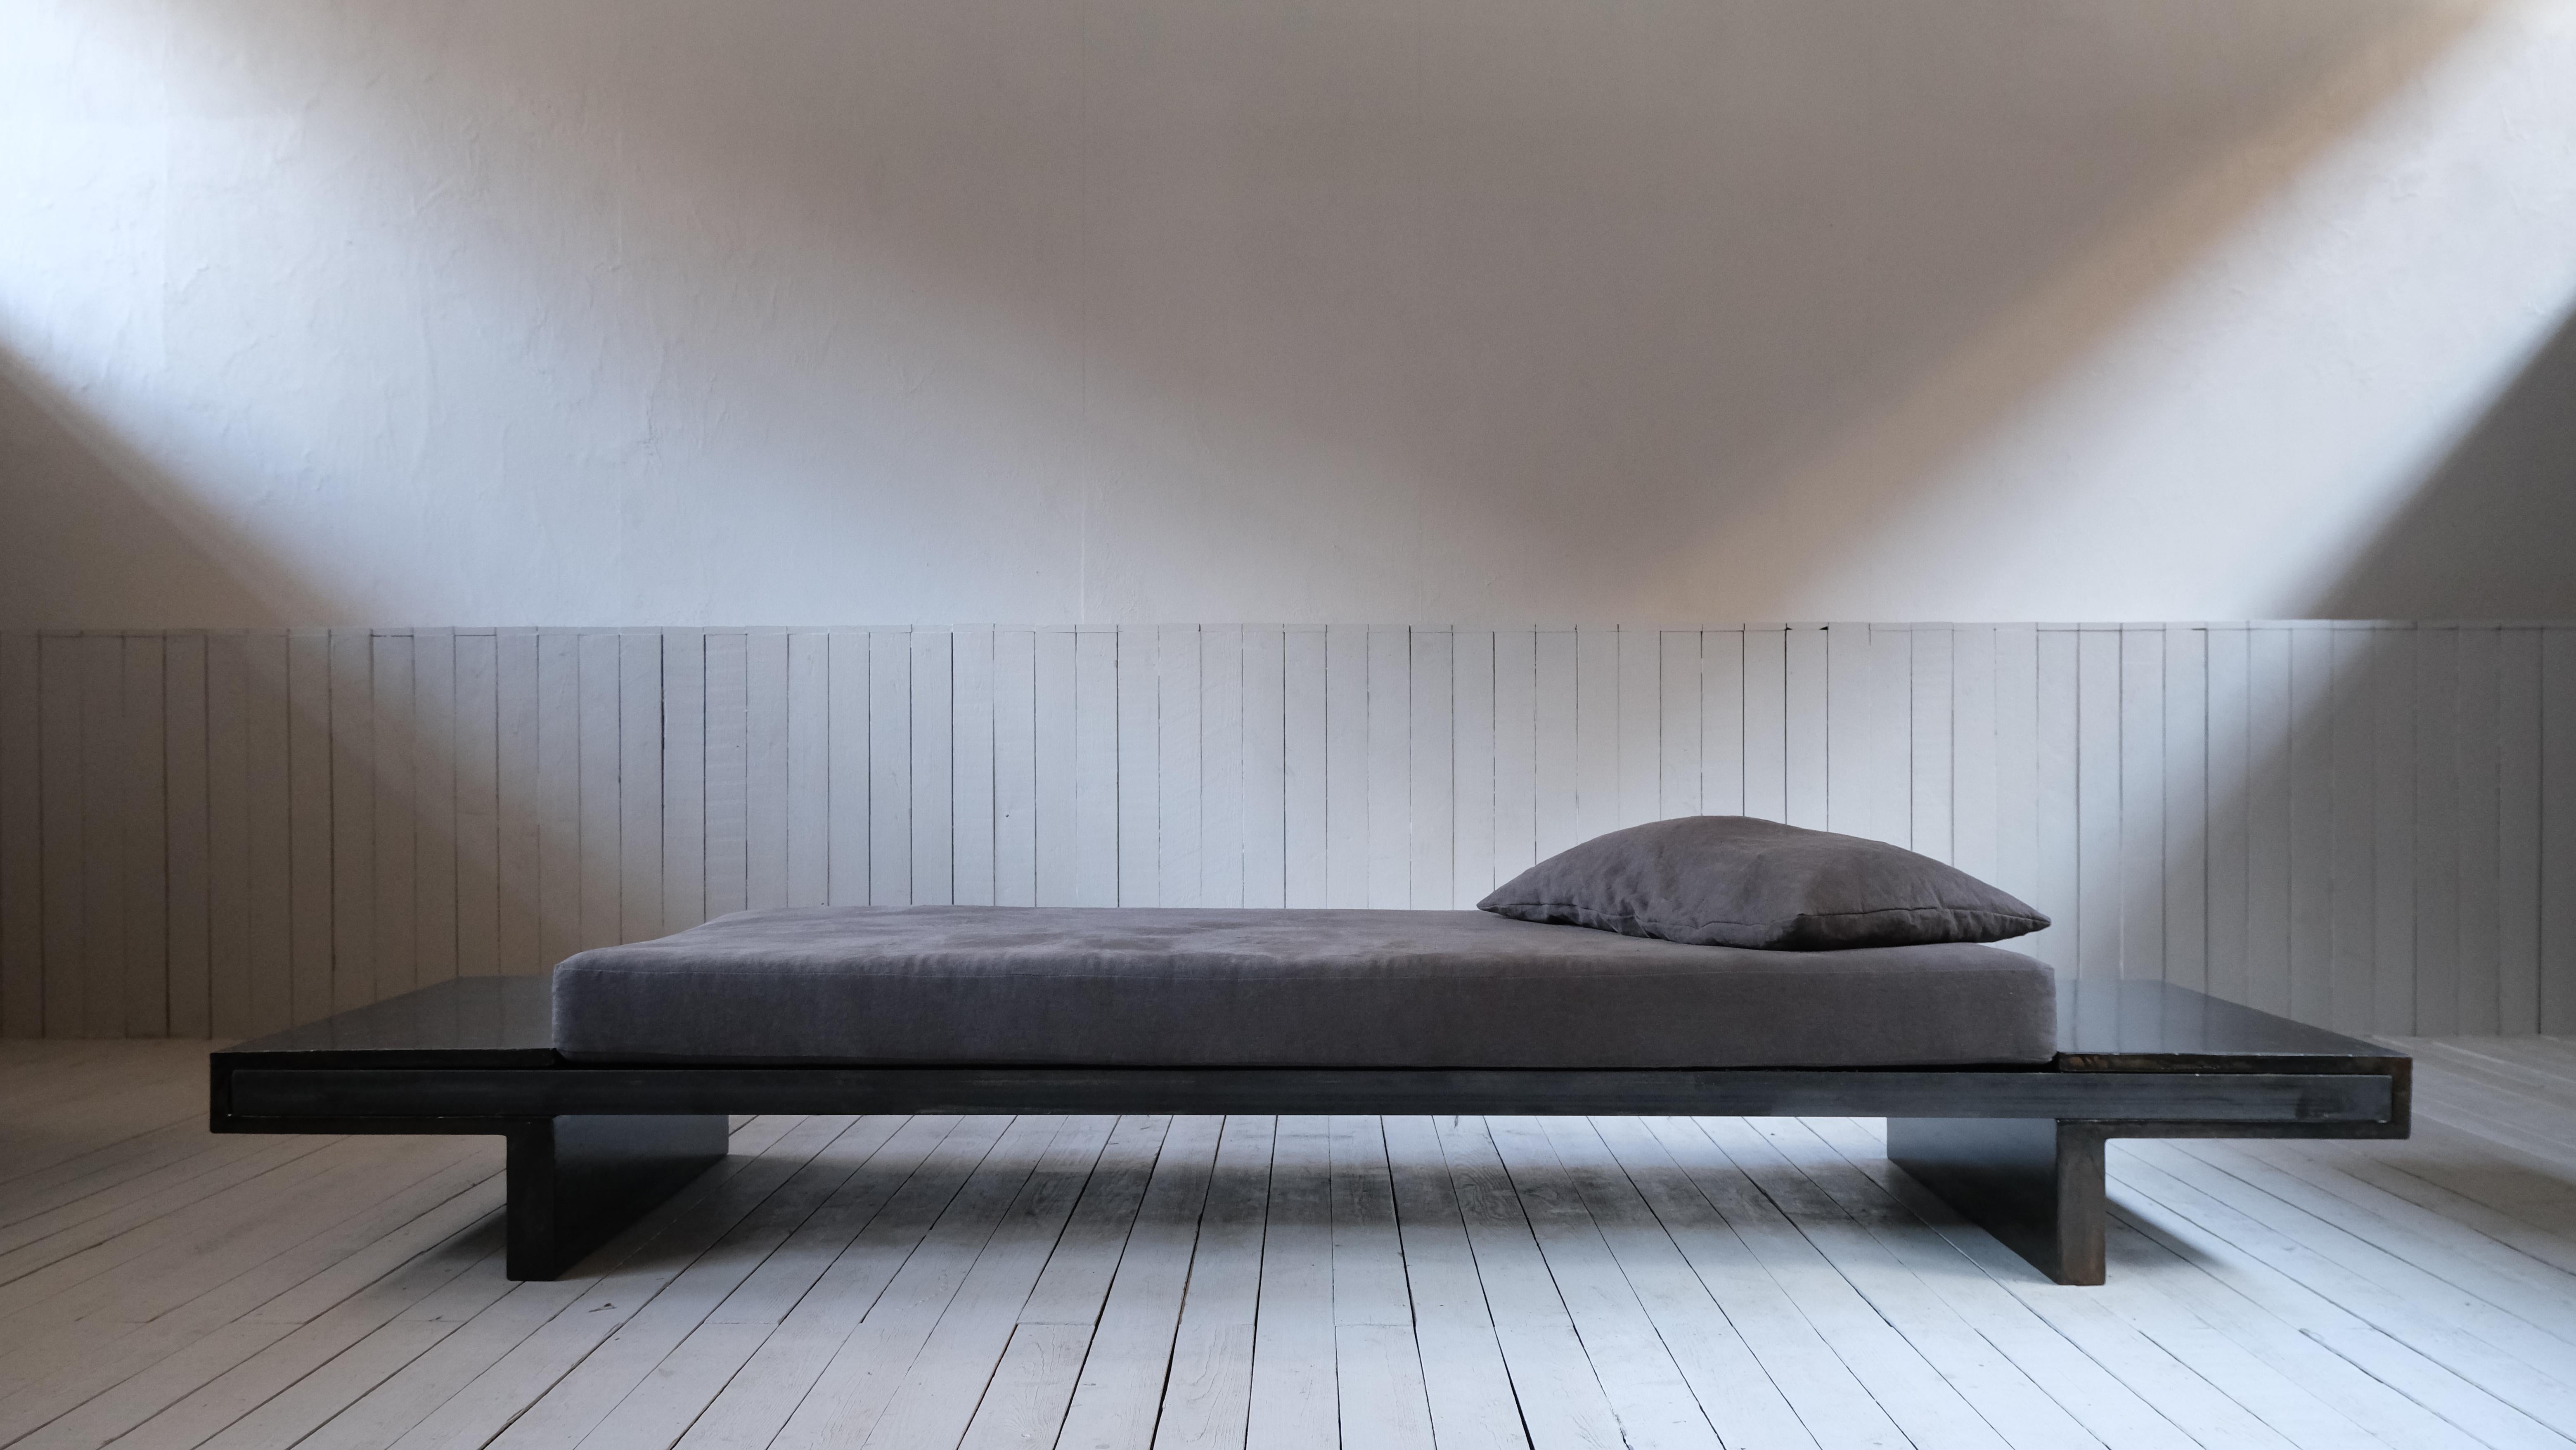 Daybed by Arno Declercq
Limited Edition of 8
Dimensions: D 285 x W 80 cm x H 40 cm
Materials: Belgian linen & patinated steel
Signed by Arno Declercq

Arno Declercq
Belgian designer and art dealer who makes bespoke objects with passion for